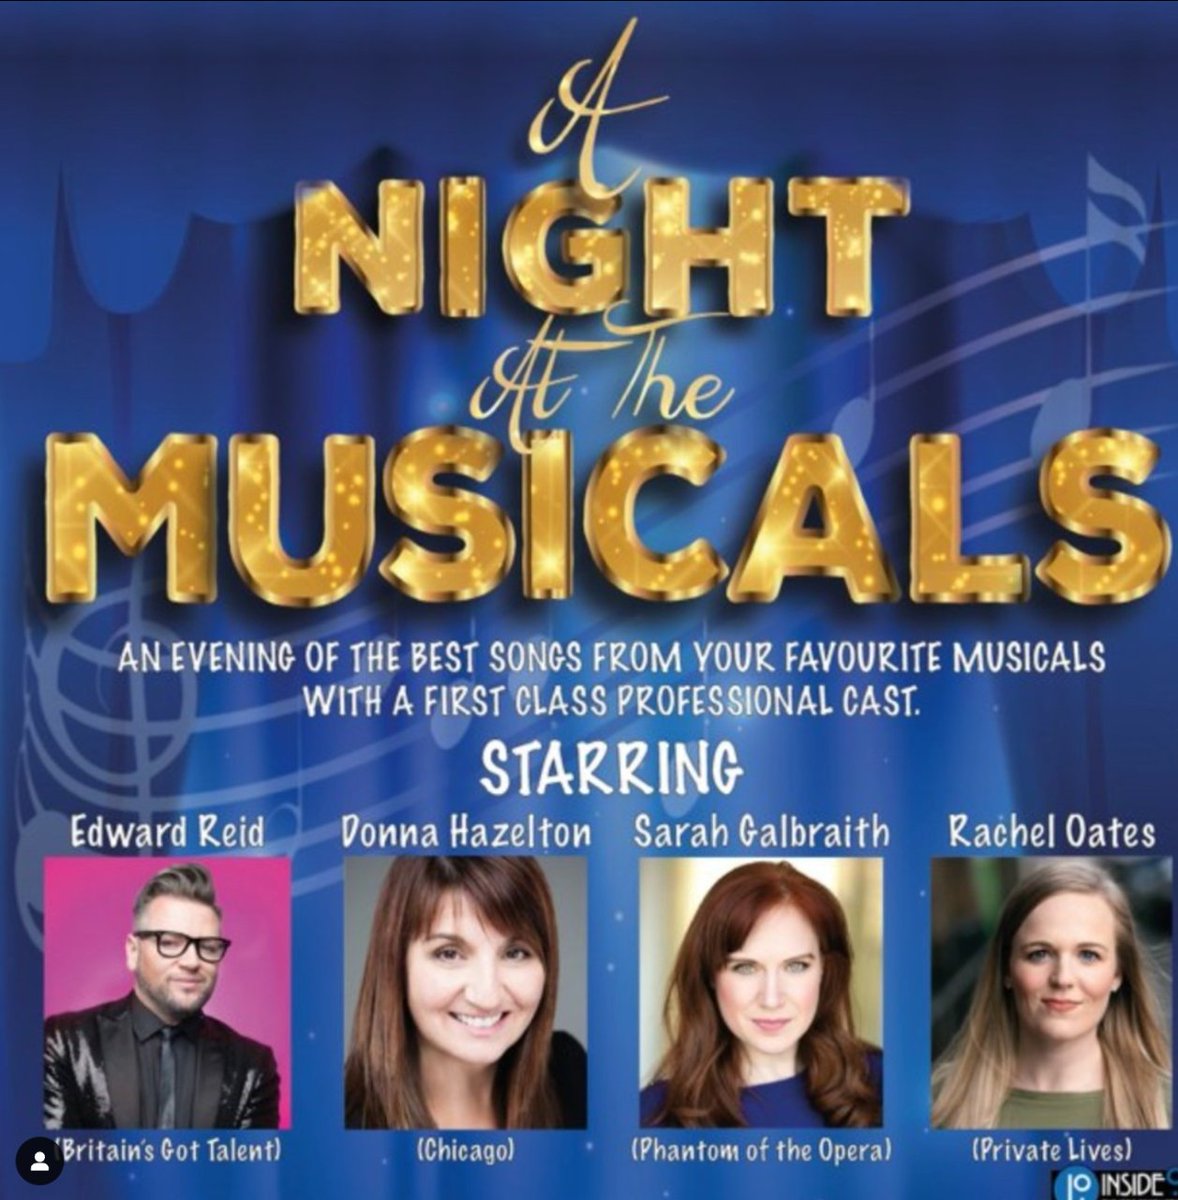 Enjoy A Night at the Musicals at Motherwell Concert Hall on Saturday 19th August, with four fabulous singers including Jazzart performers & alumni & the fabulous @mredwardreid 🎭